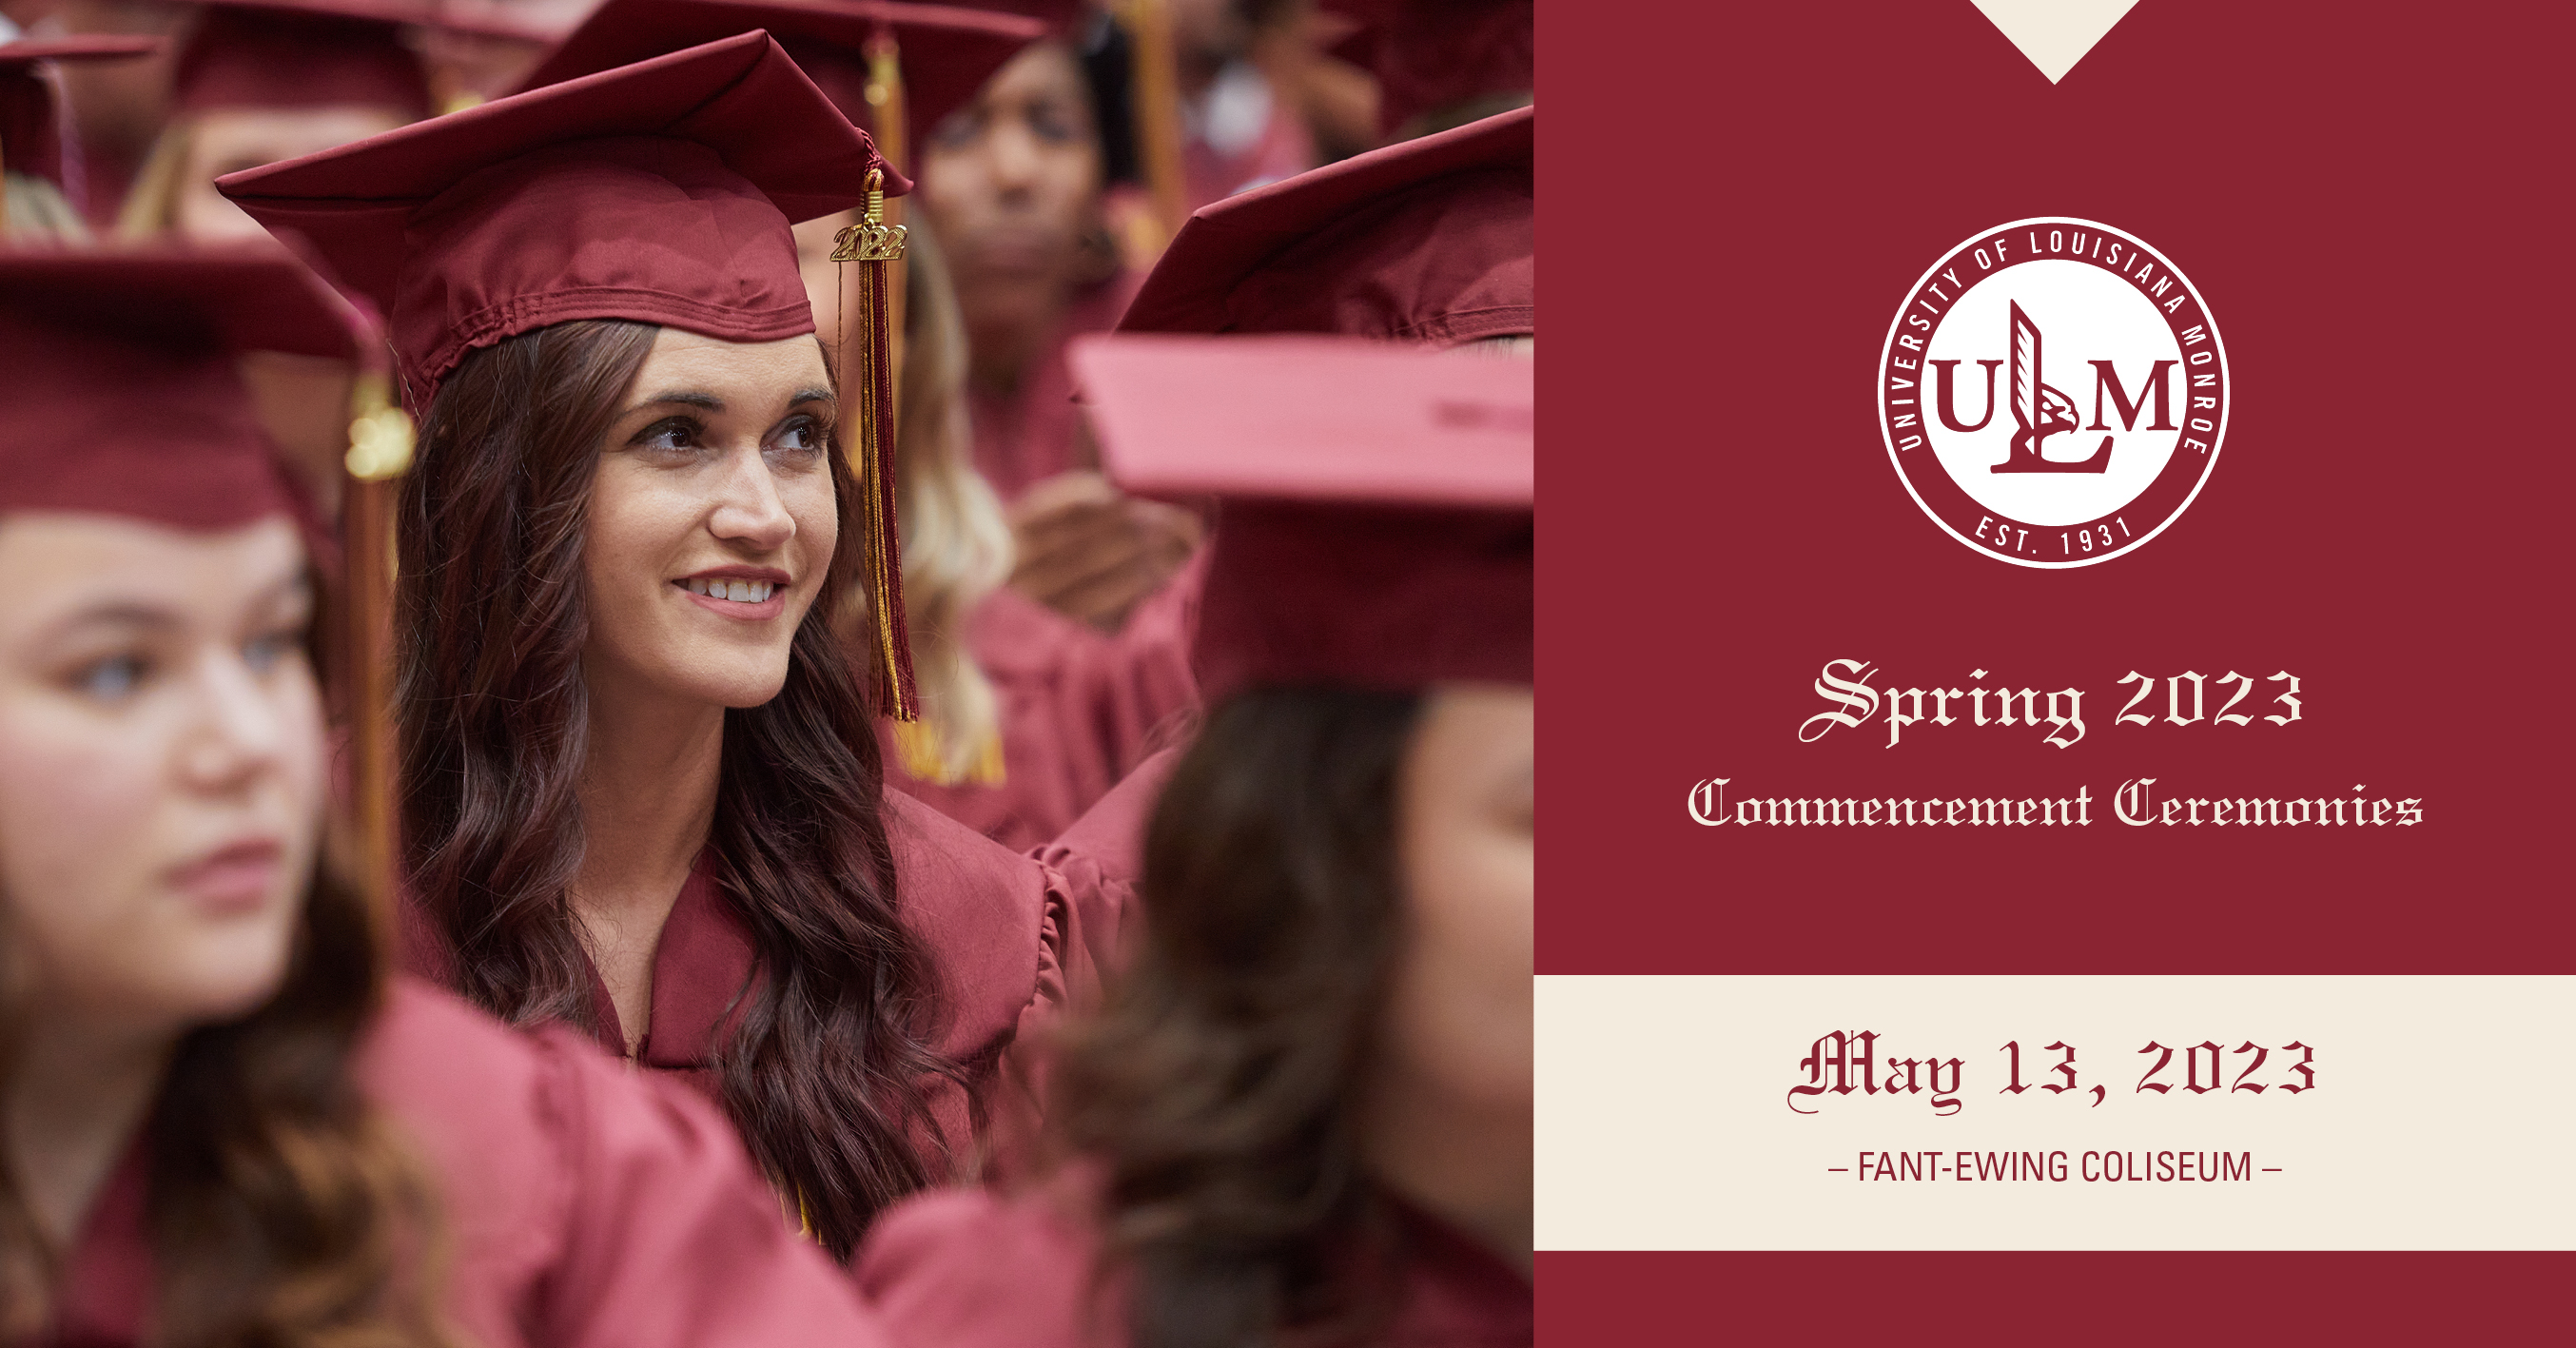 ULM to host Spring 2023 Commencement May 13 at FantEwing Coliseum